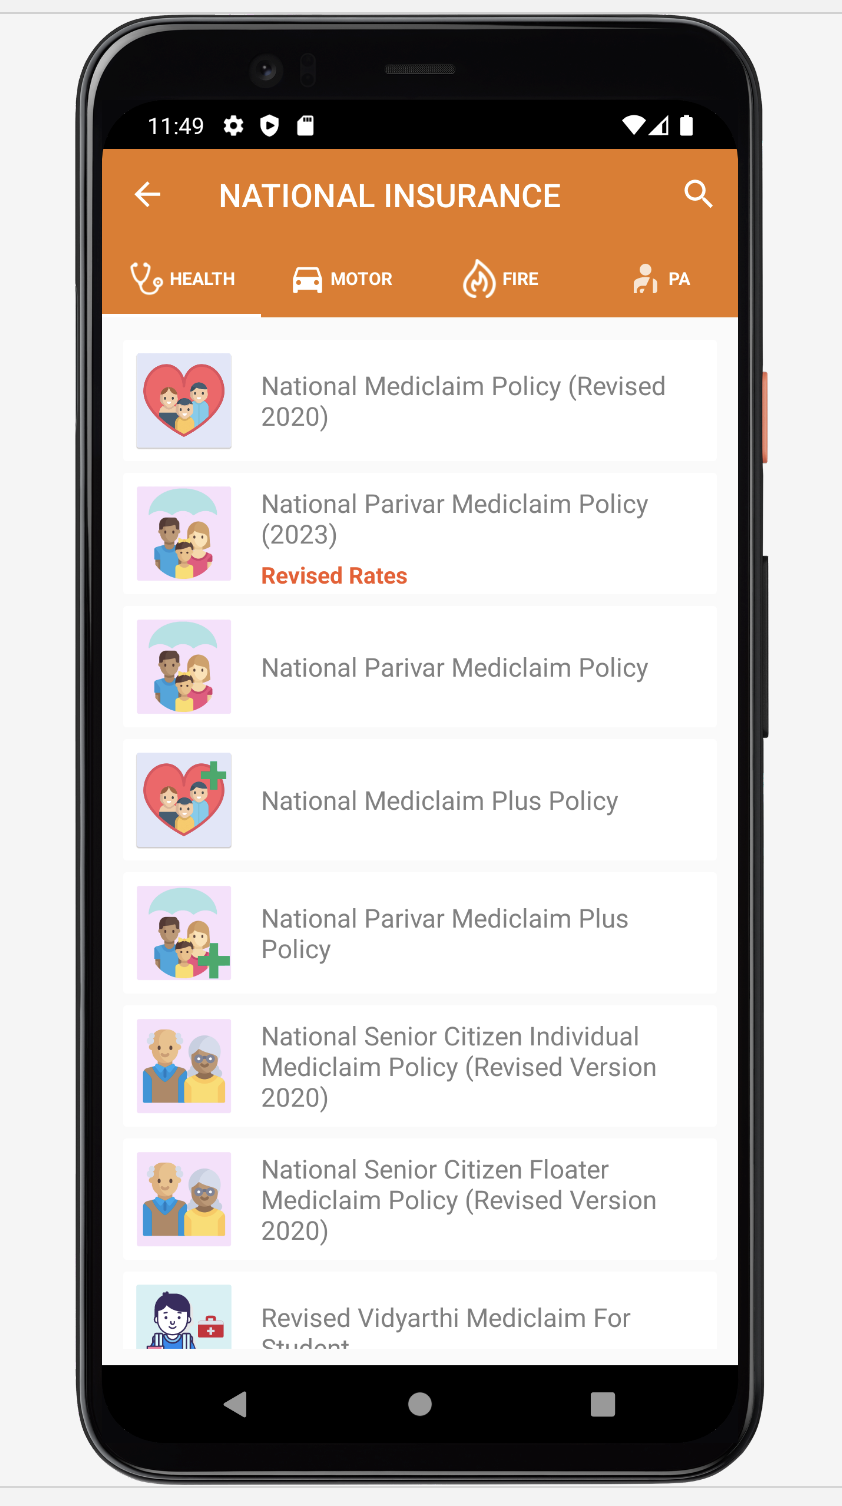 Policy List - National Insurance Company